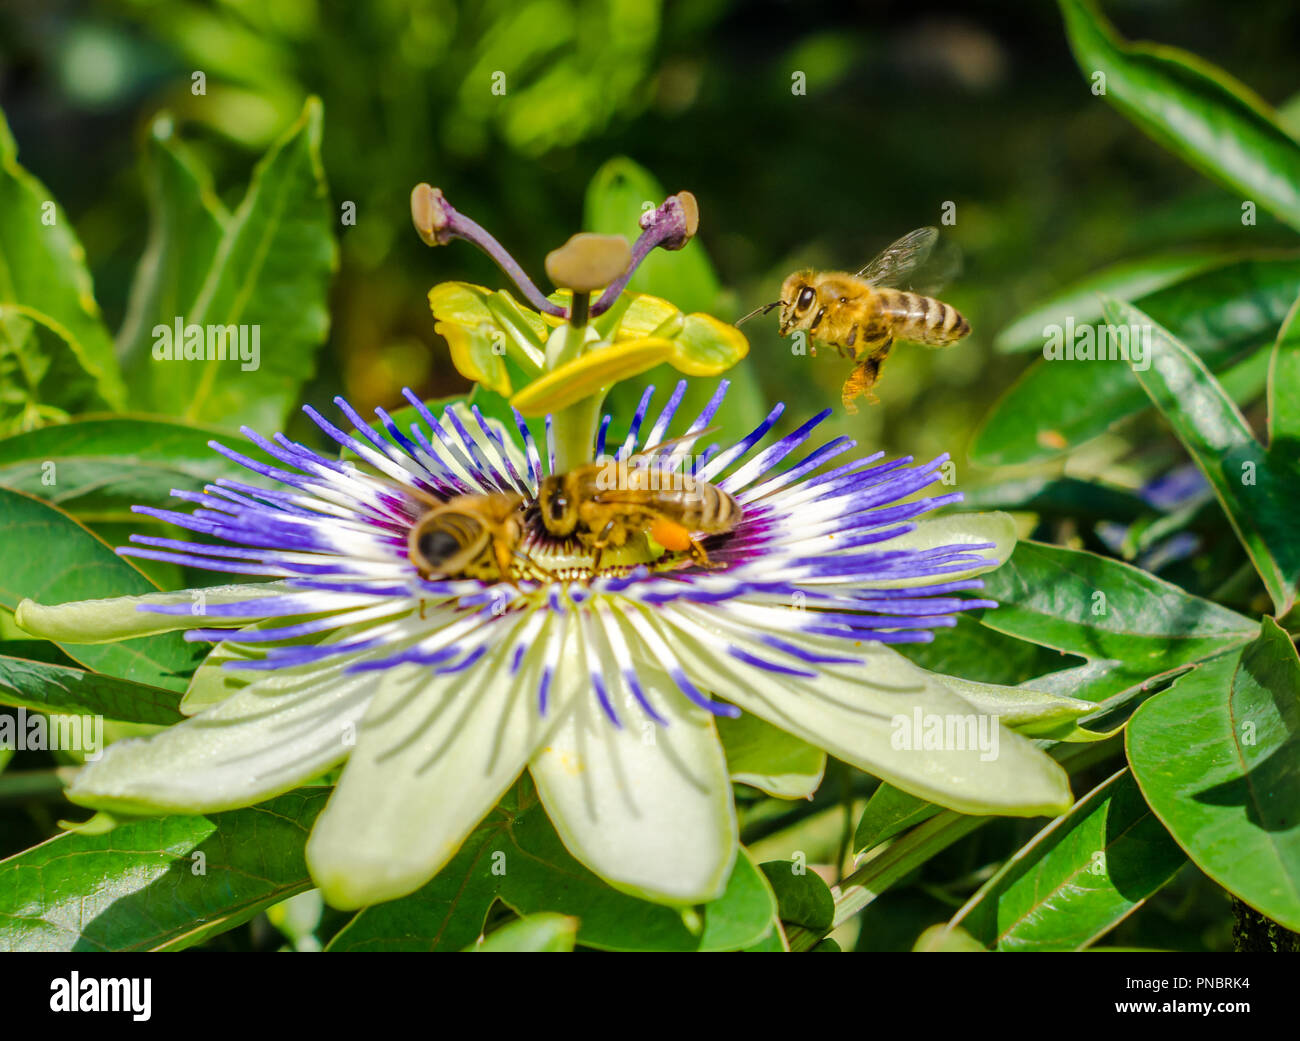 Bluecrown passionflower (Passiflora caerulea) flower,. Bees pollinating on a flower of passiflora. flower bee close up garden Stock Photo